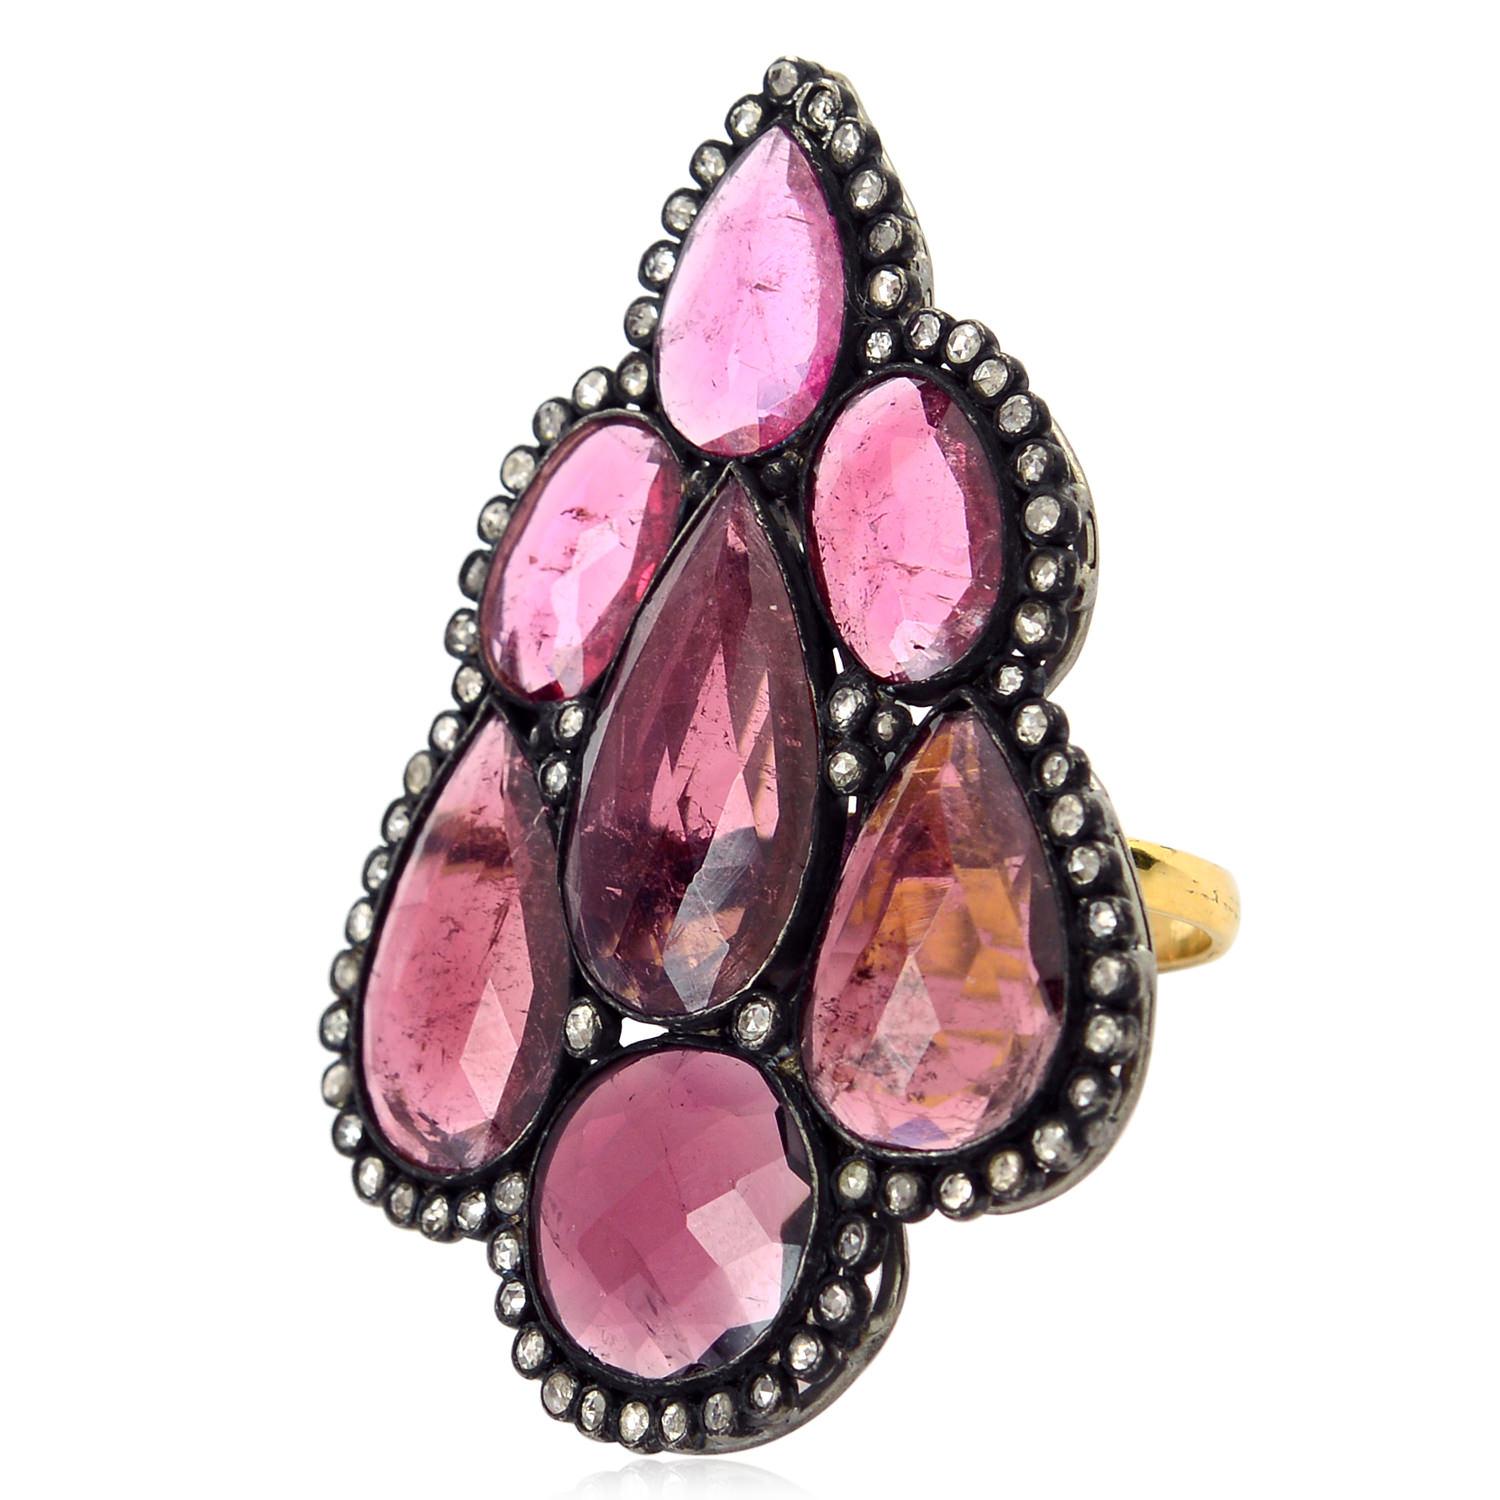 Mixed Cut 15.17ct Multishaped Pink Tourmaline Ring WIth Diamonds Made In 14k Gold & Silver For Sale